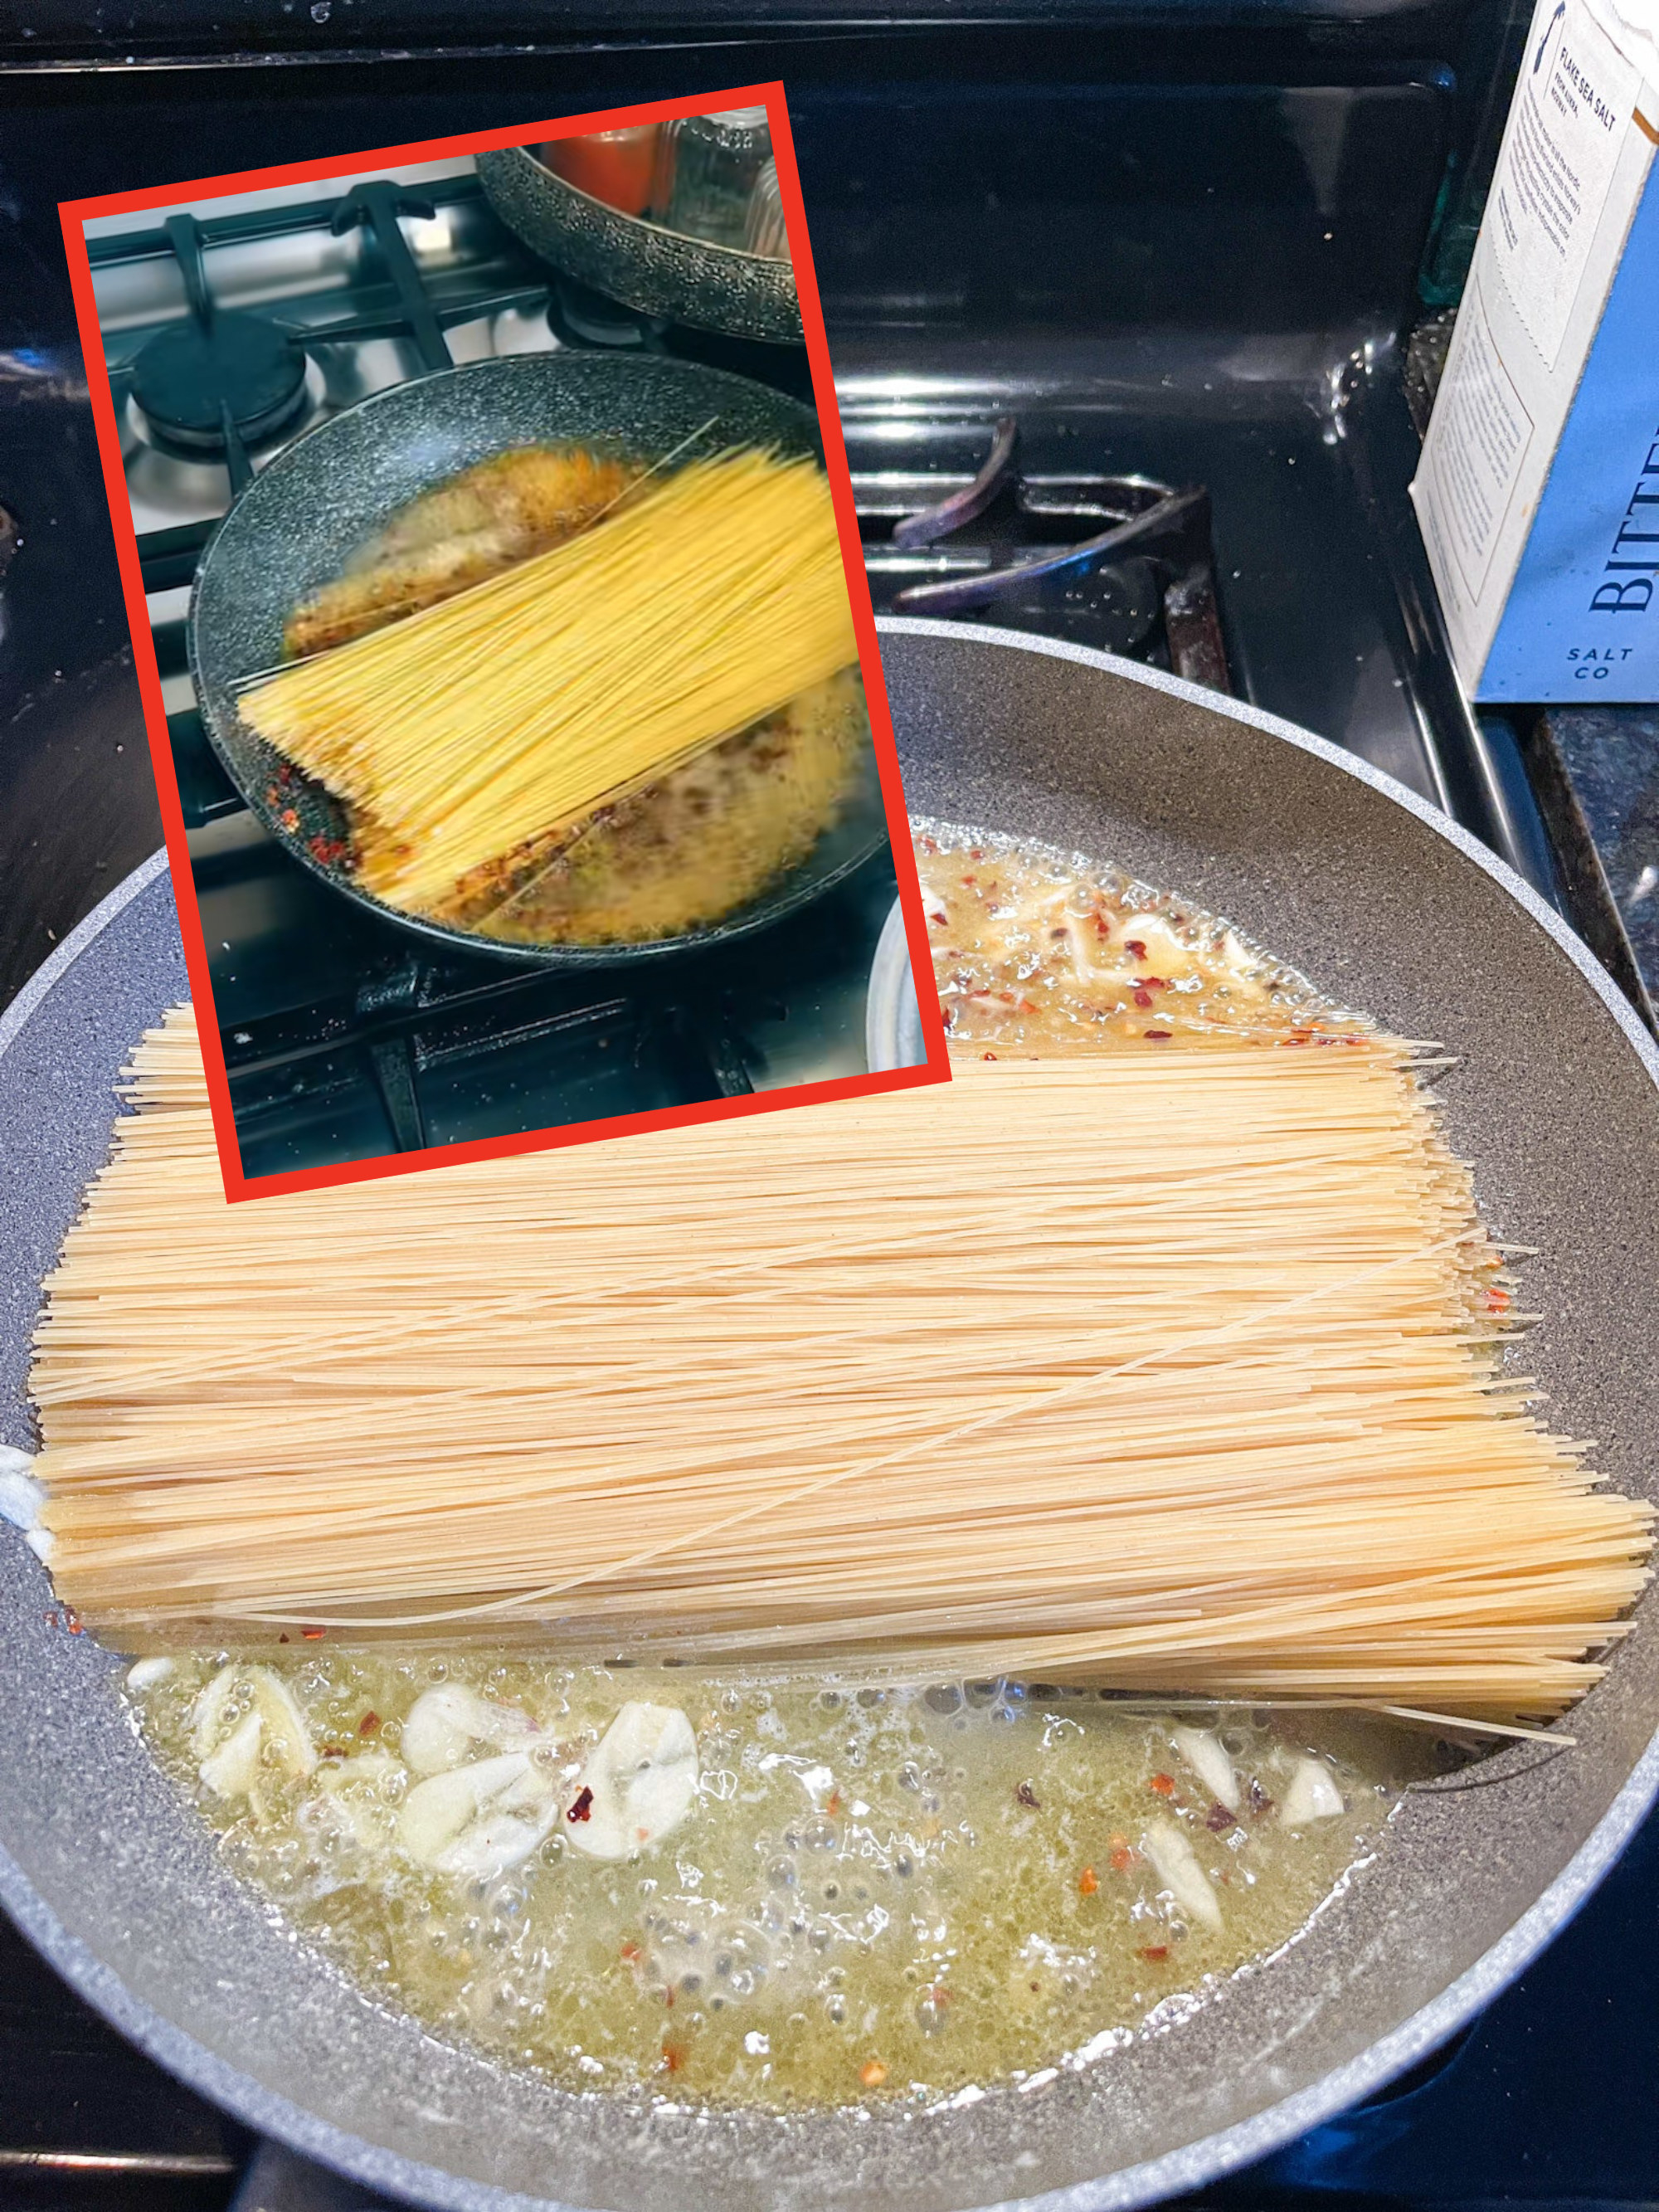 Pasta in the pan with other ingredients